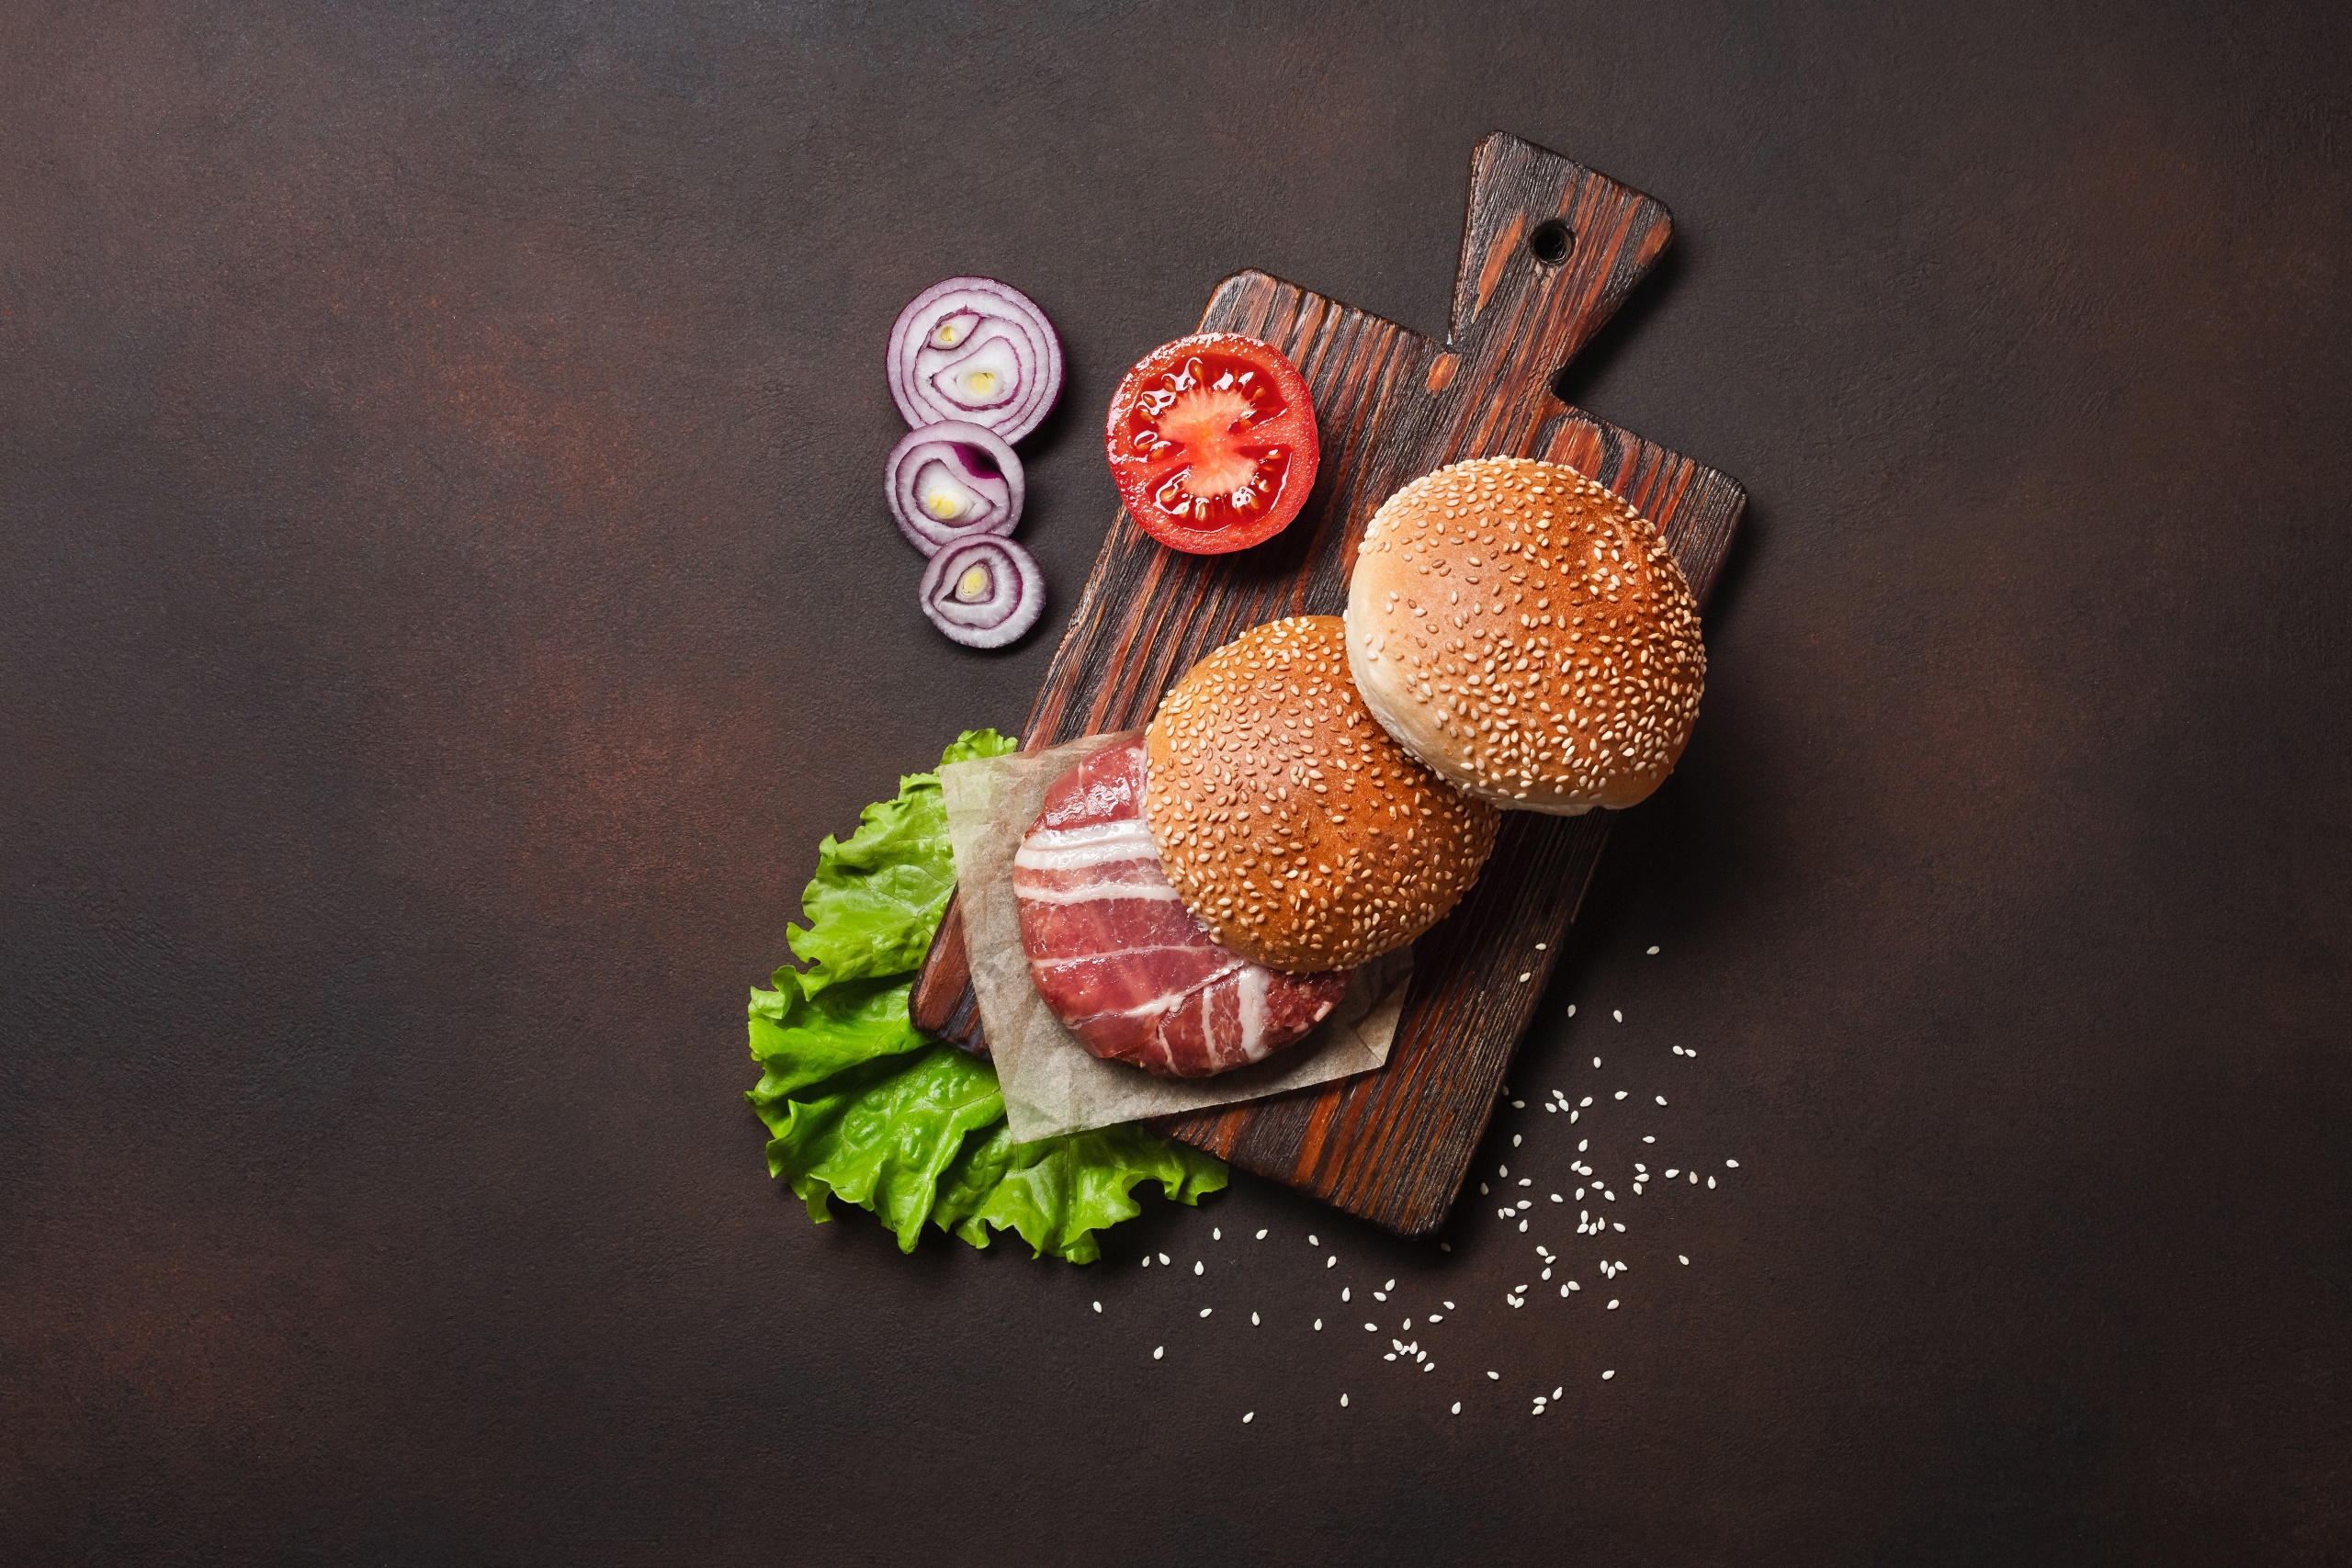 Food Meat Onions Burger Tomatoes Bread Lettuce Cutting Board Seeds 2560x1707